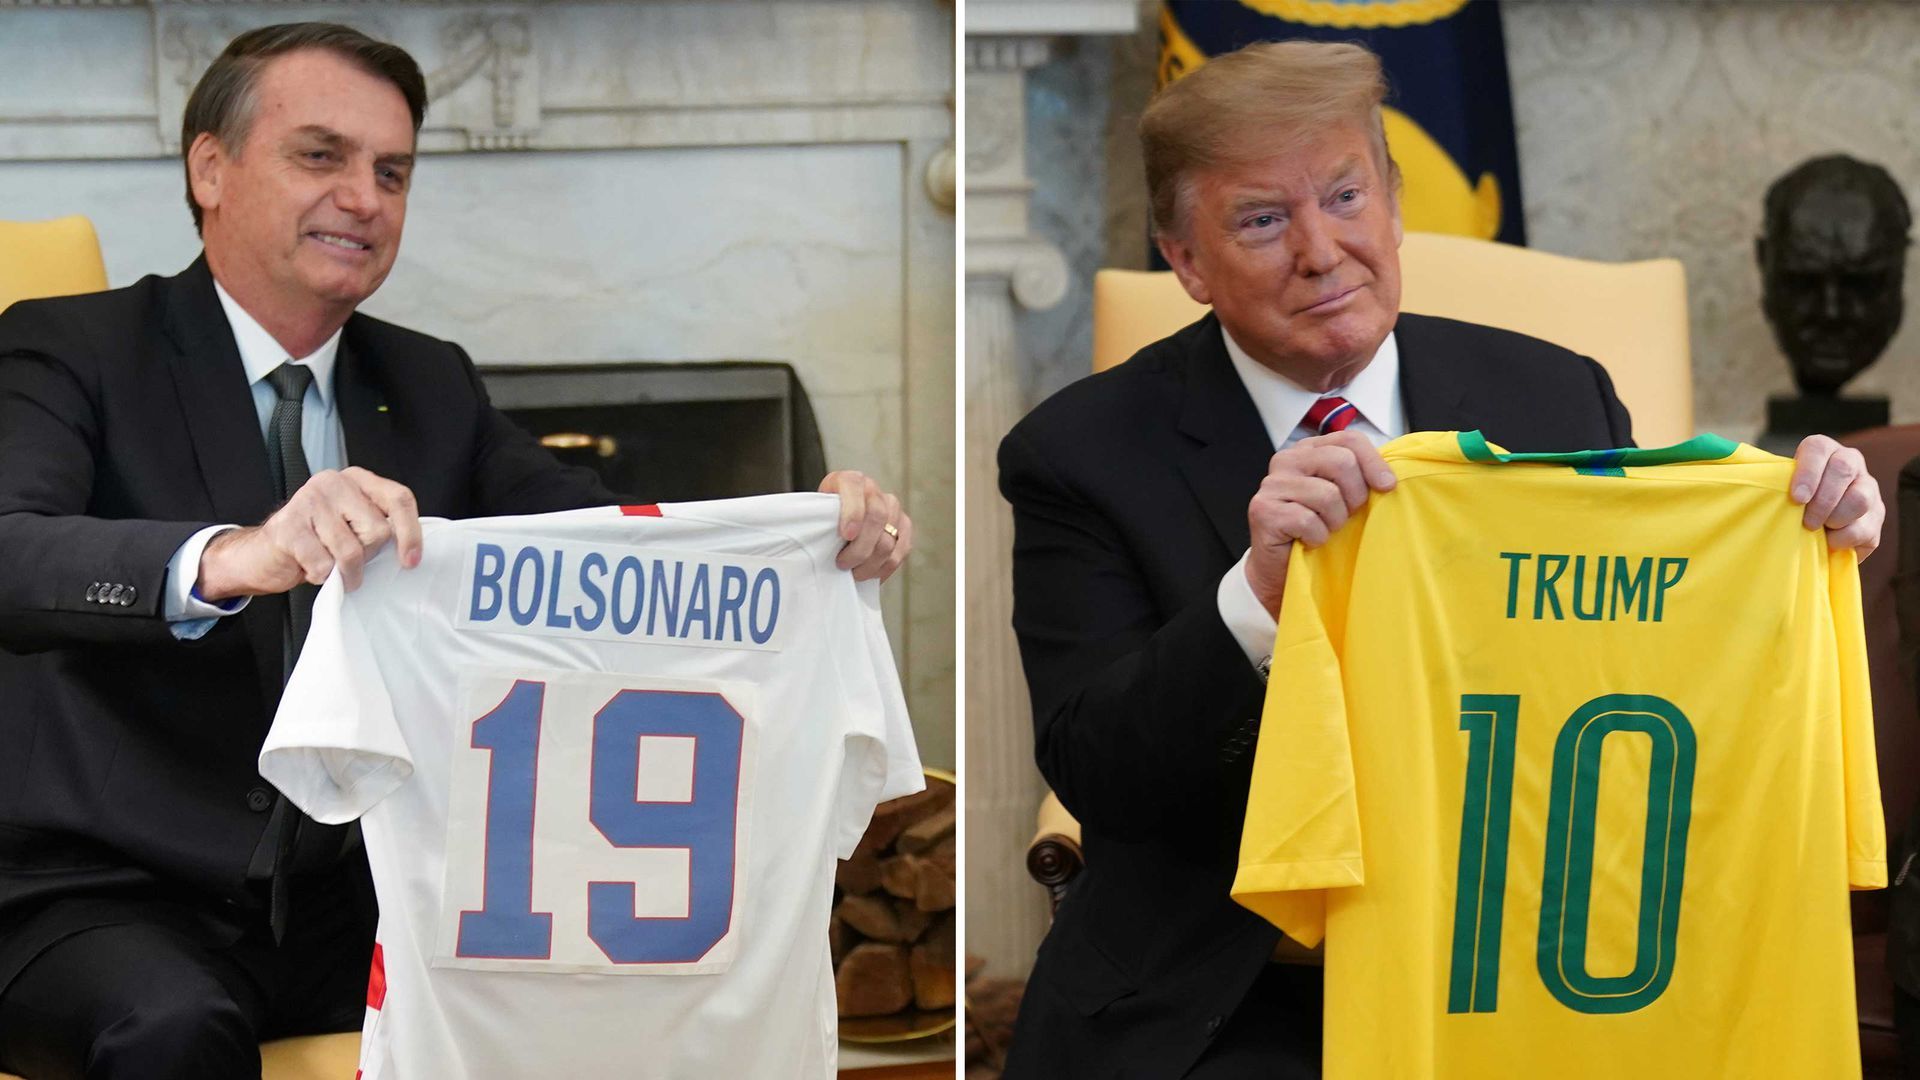 The two exchanged soccer jerseys in the Oval Office yesterday. (Chris Kleponis/Pool/Getty Images)